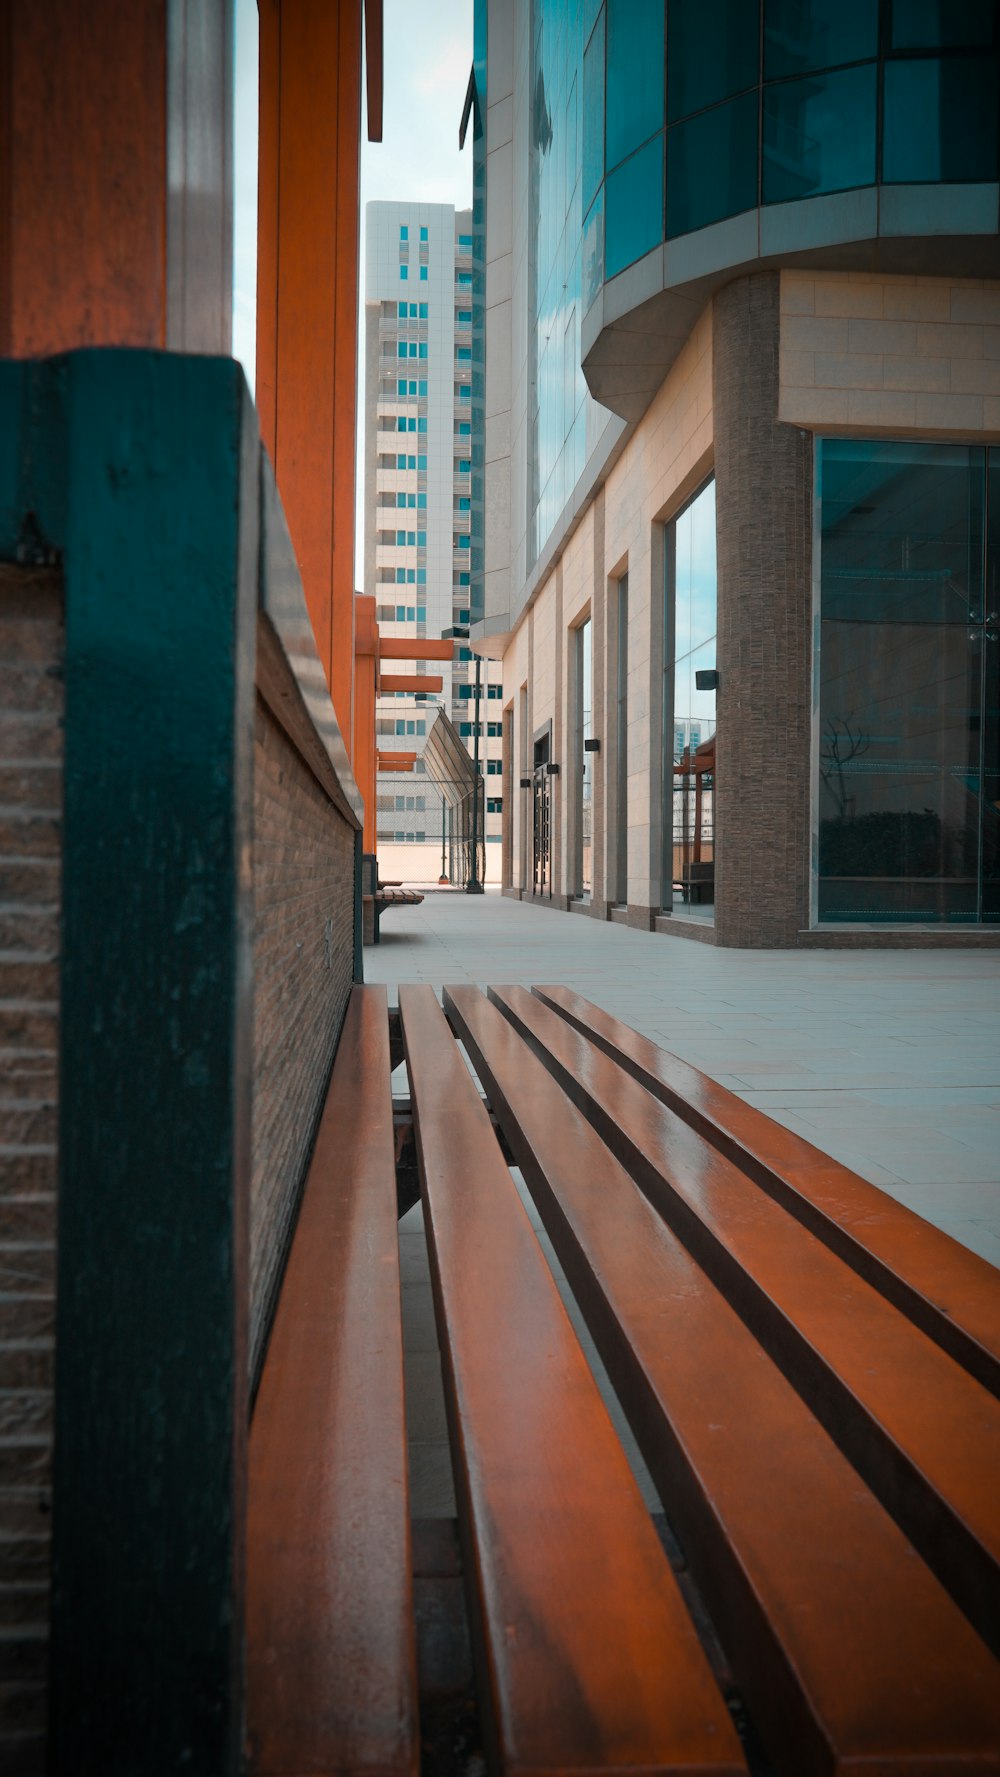 a wooden bench sitting in front of a tall building